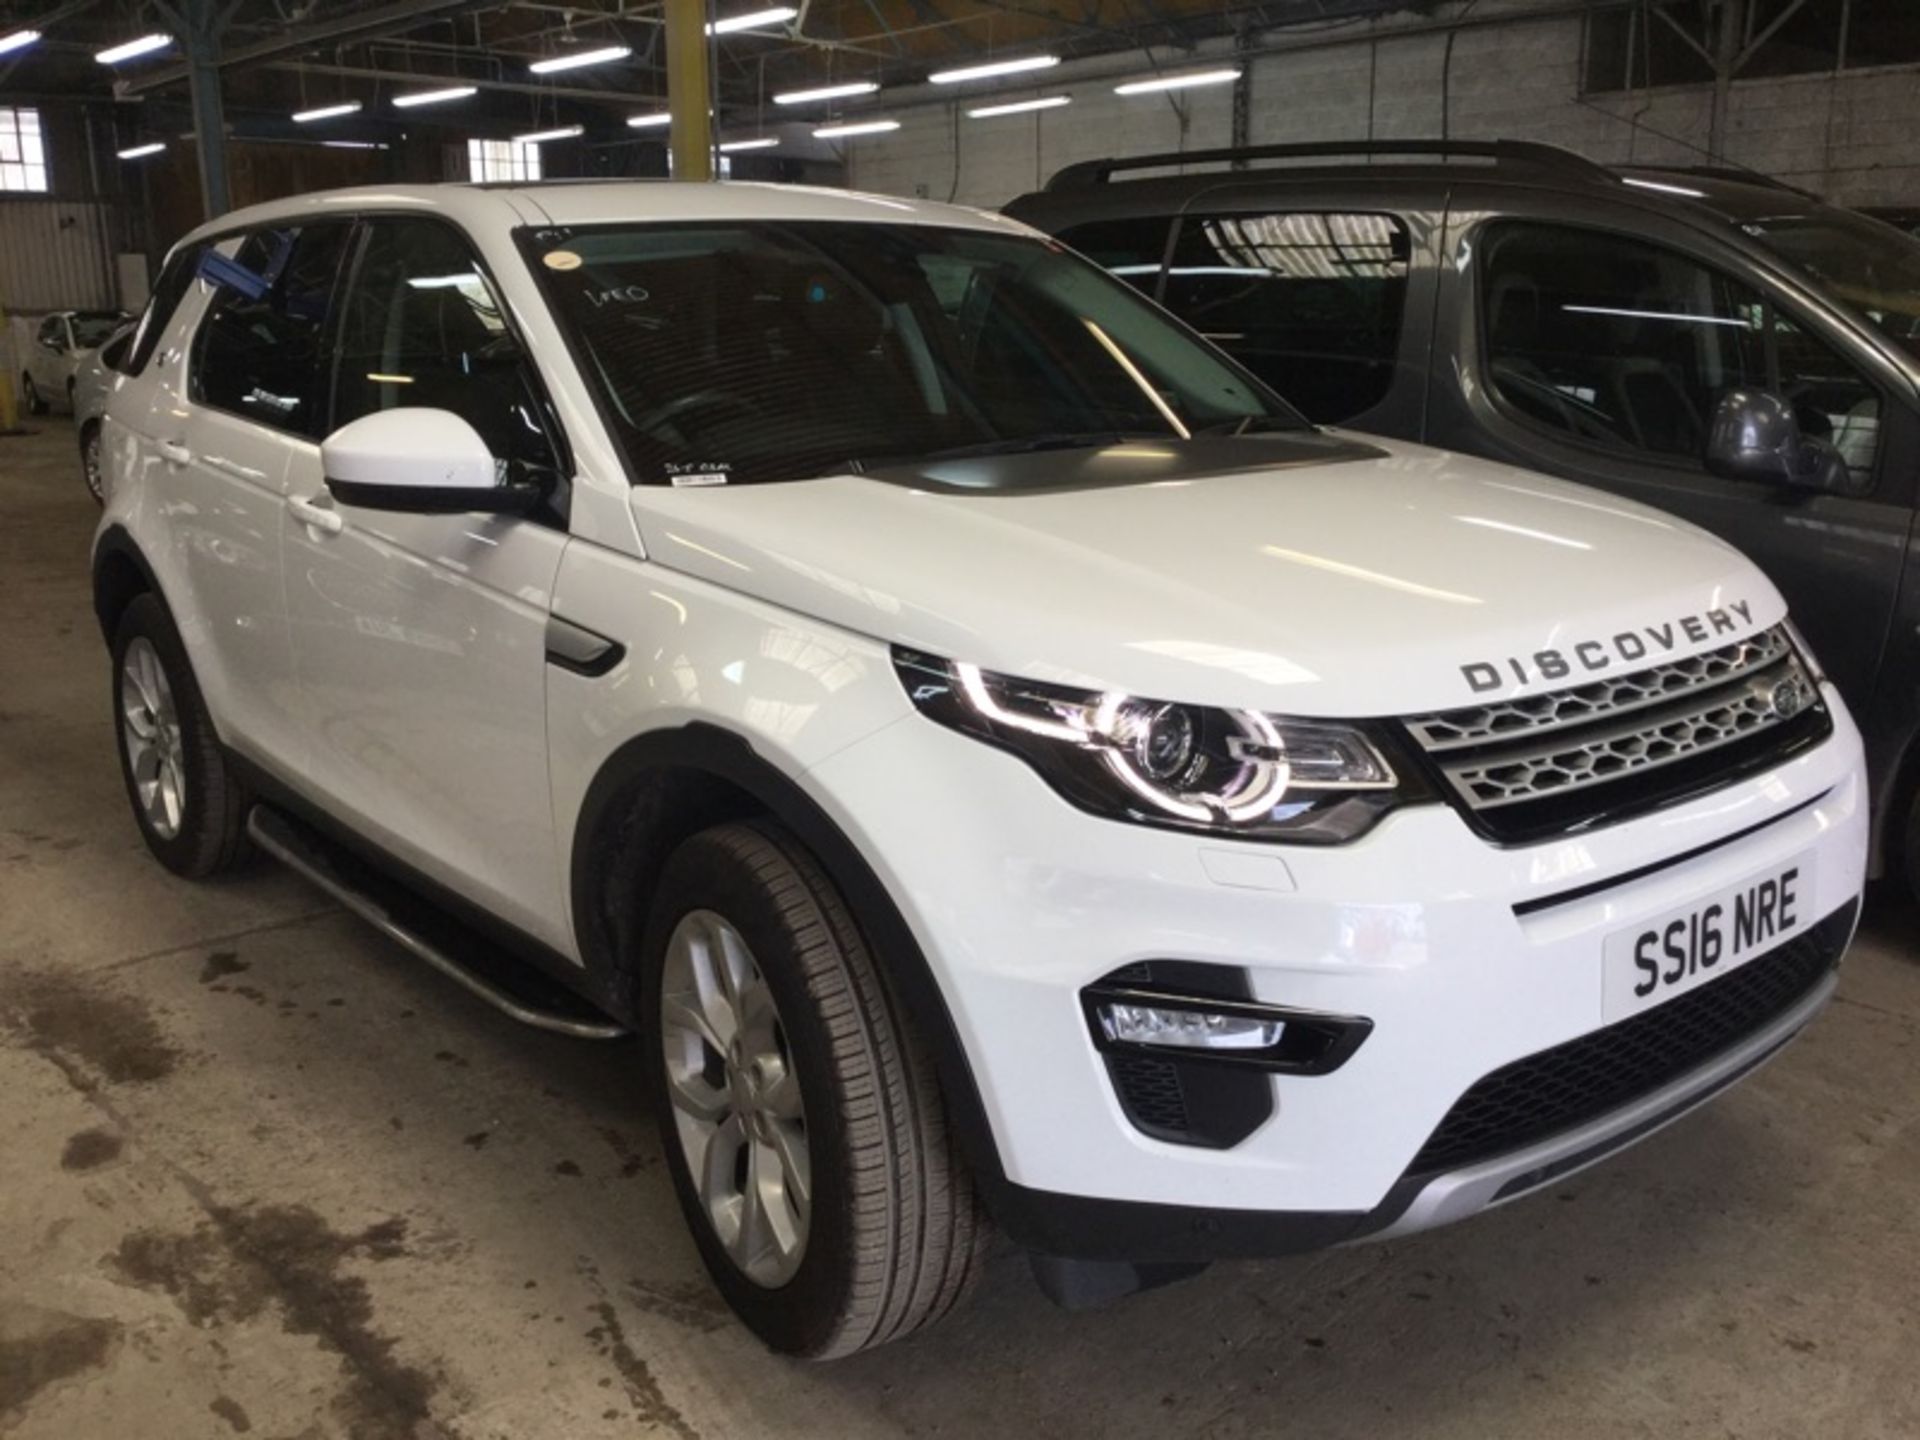 ** ON SALE ** Land Rover Discovery Sport TD4 180 HSE 2.0 2016'16 Reg'-Alloy Wheels-7 seats-